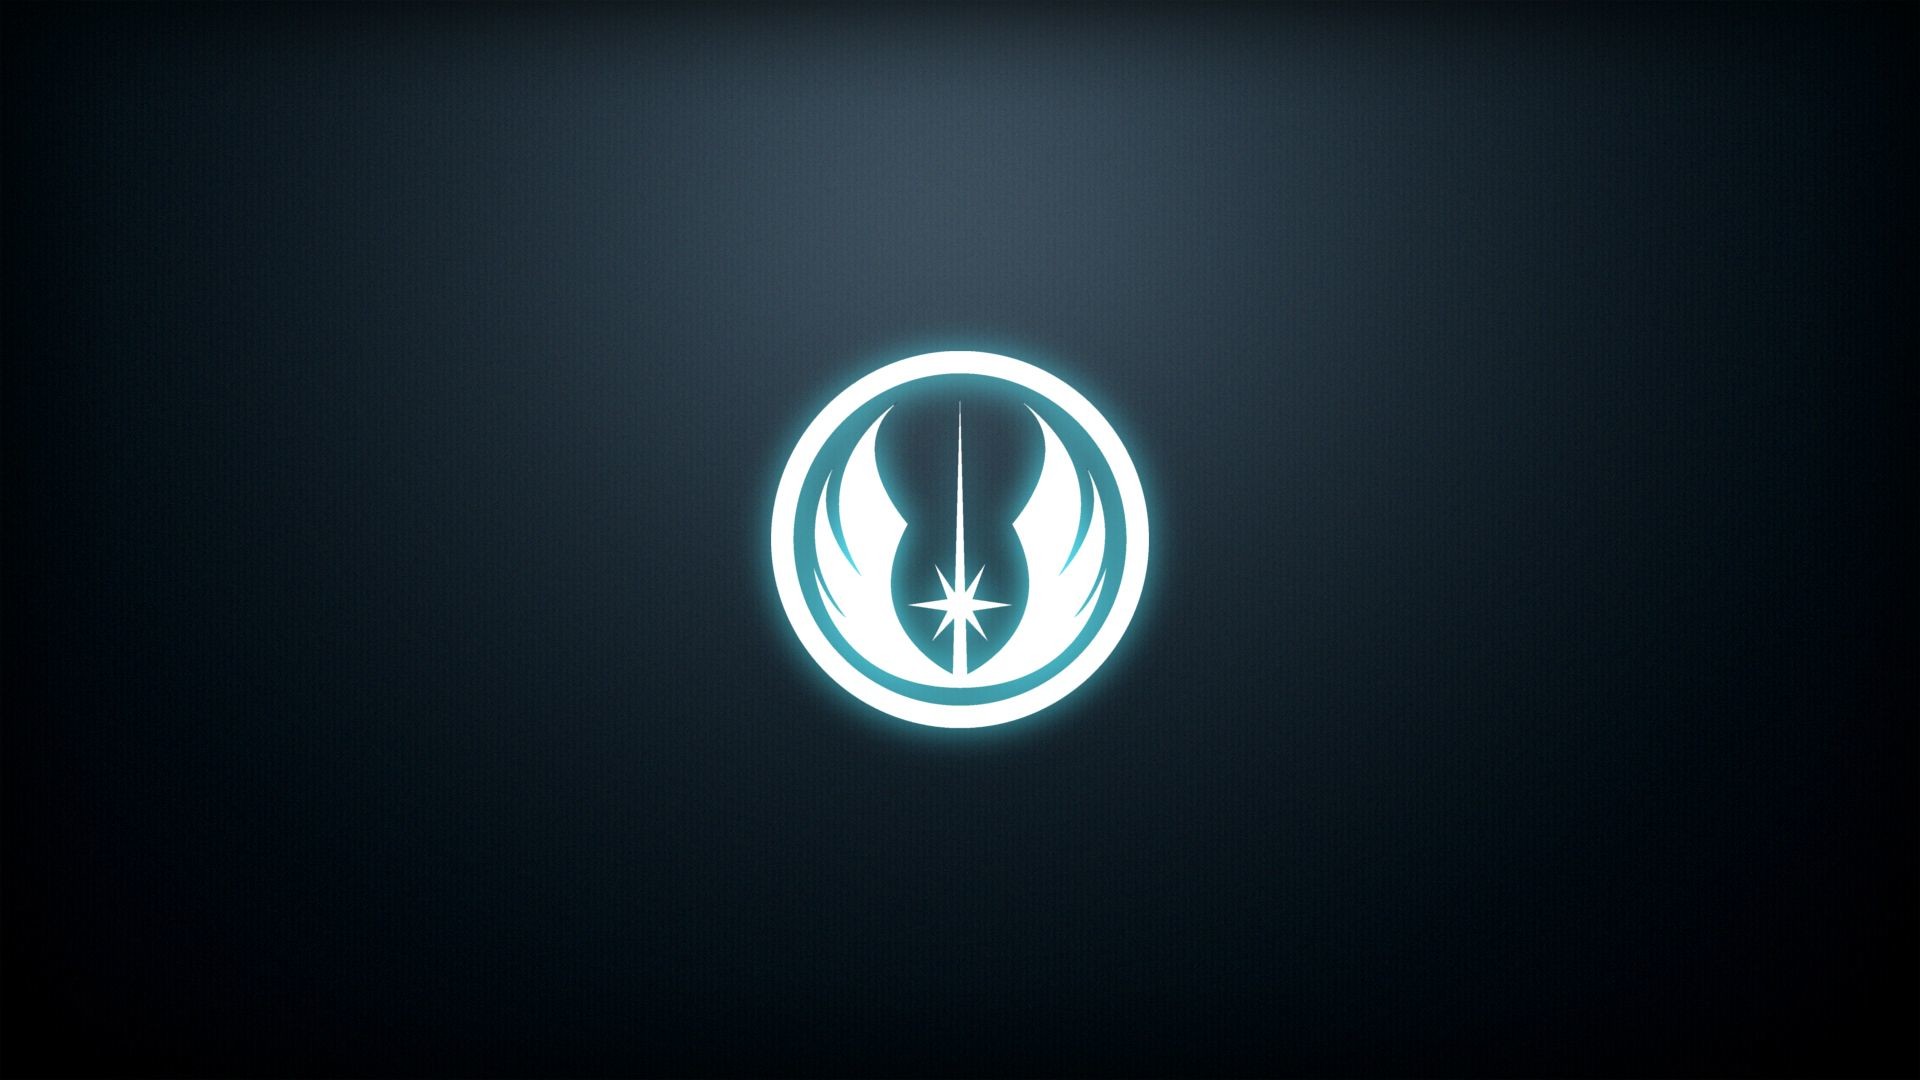 1920x1080 Star Wars Wallpapers with Jedi Symbol | The Art Mad Wallpapers